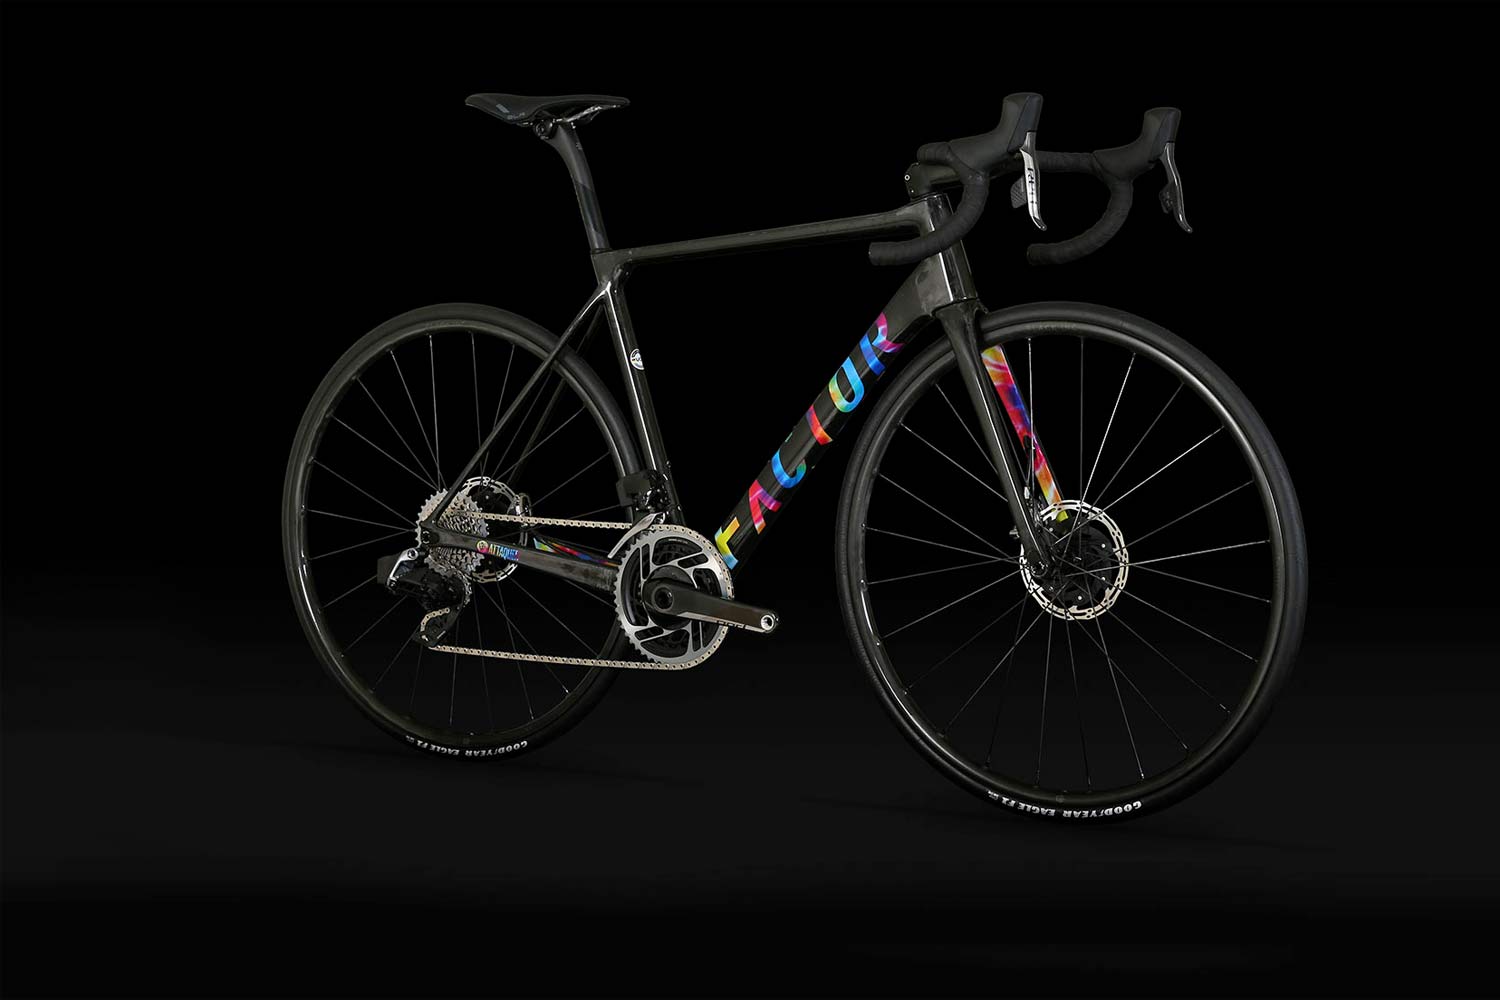 Factor O2 VAM is an ultralight carbon climber's road bike that weighs just 677g, complete angled